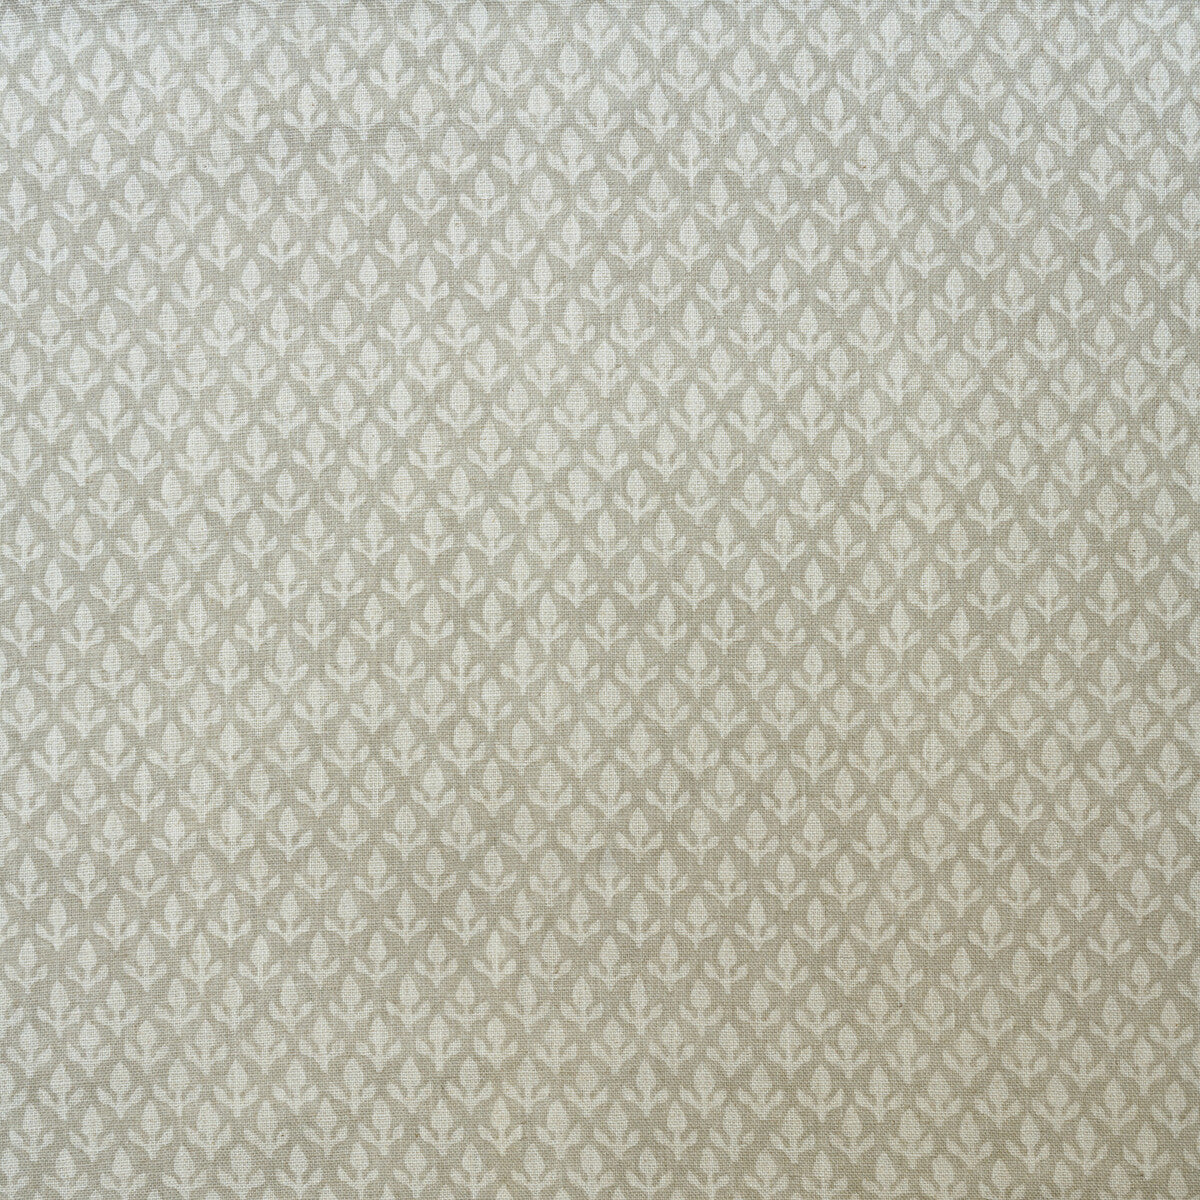 Bud fabric in stone color - pattern AM100379.106.0 - by Kravet Couture in the Andrew Martin Garden Path collection